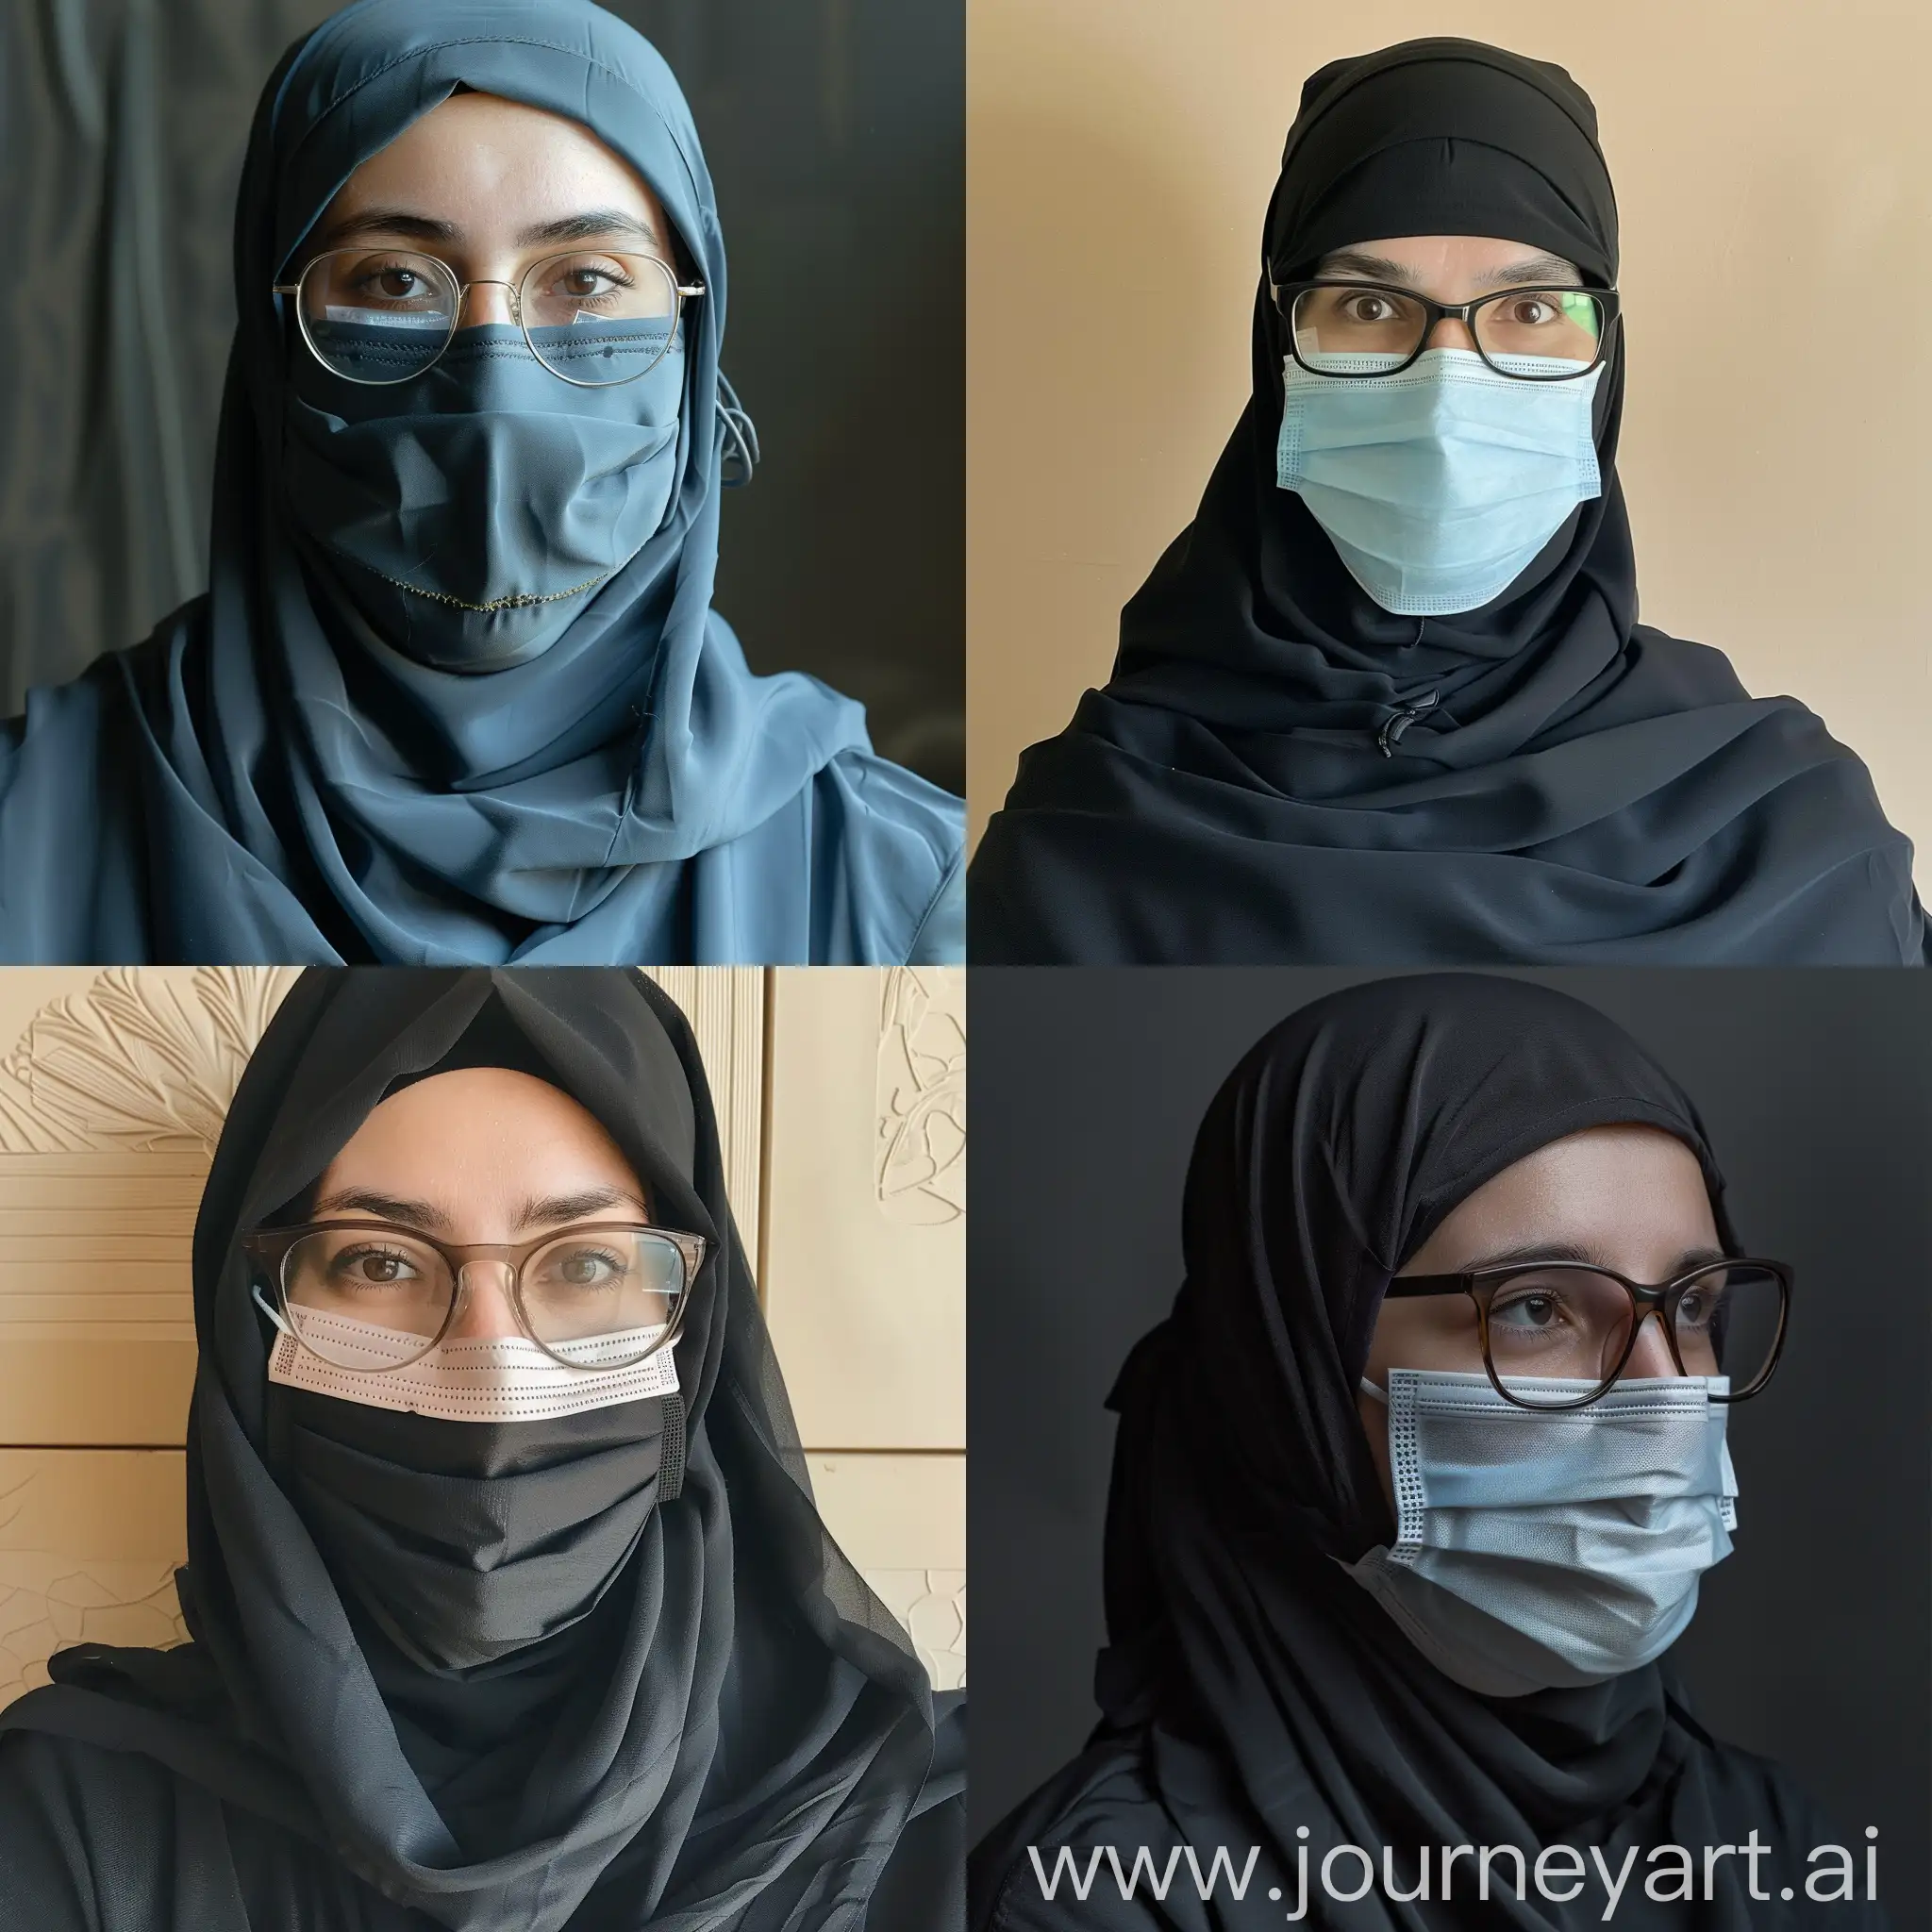 Woman wearing tight niqab and wearing double surgical masks under the niqab which can be seen slightly. She wears glasses and her eyebrows are covered with the veil.